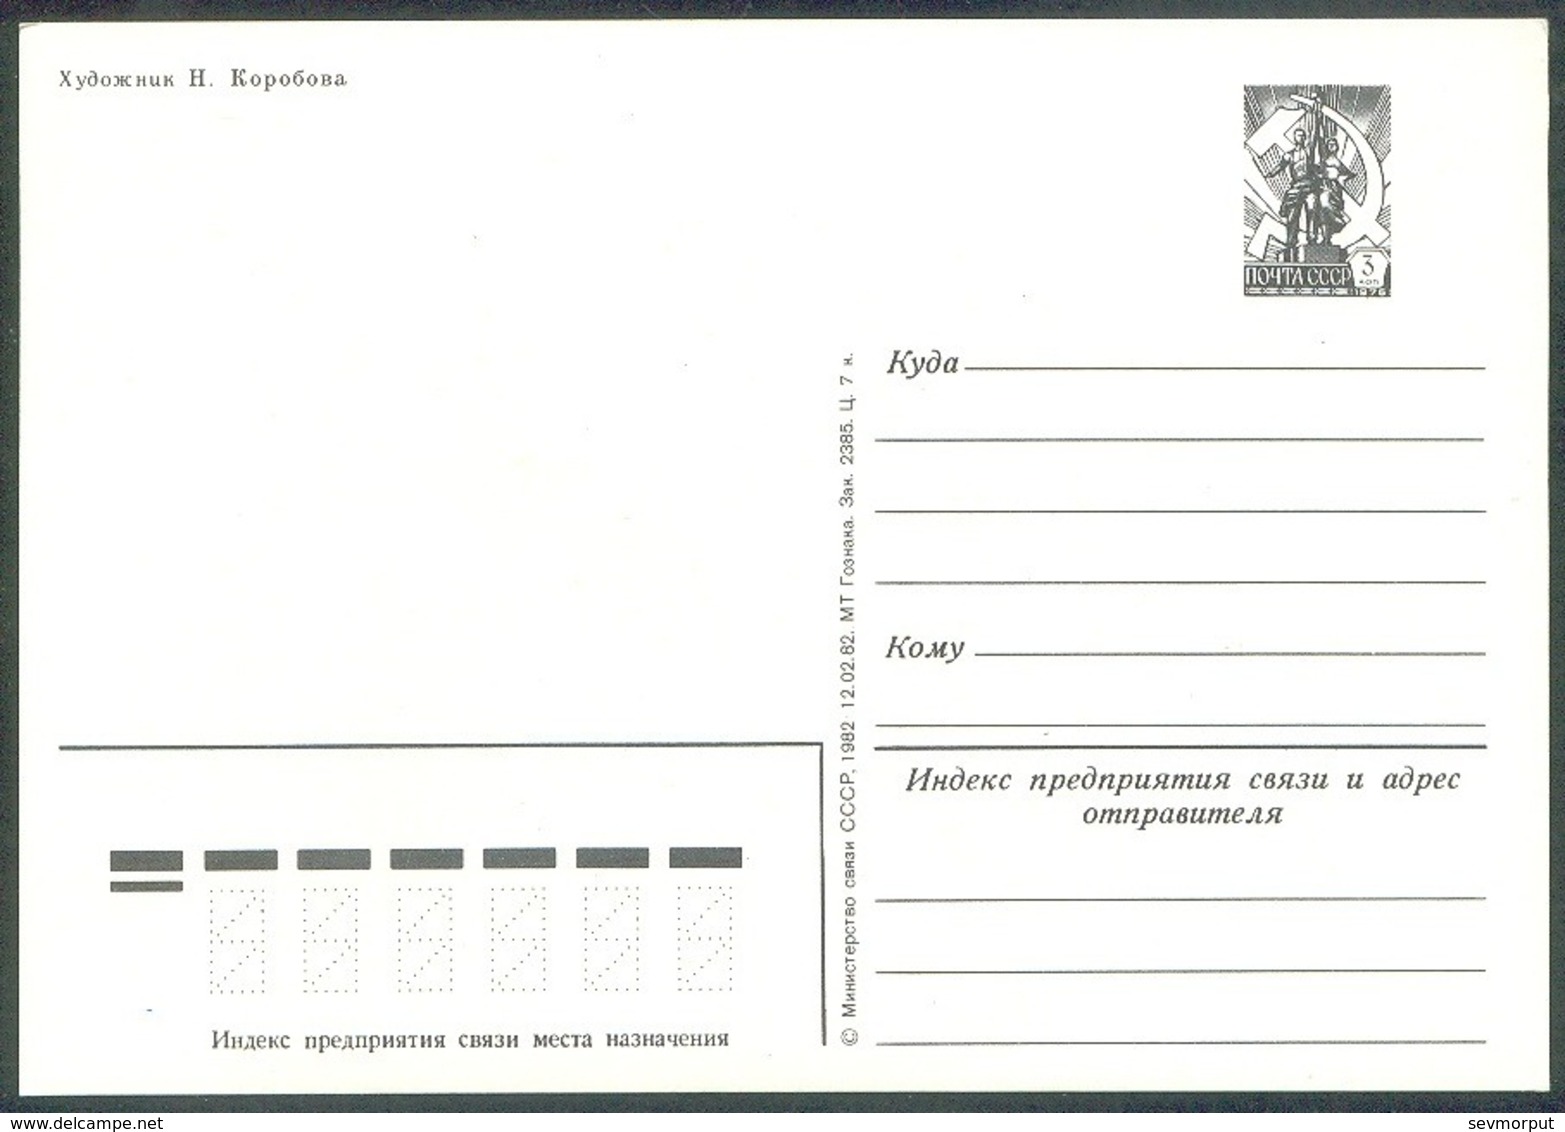 2018 RUSSIA 1982 ENTIER POSTCARD 2385 Mint MARCH 8 WOMAN Day MOTHER Celebration PINOCCHIO FAIRY TALES Conte Fee MARCHE - Mother's Day